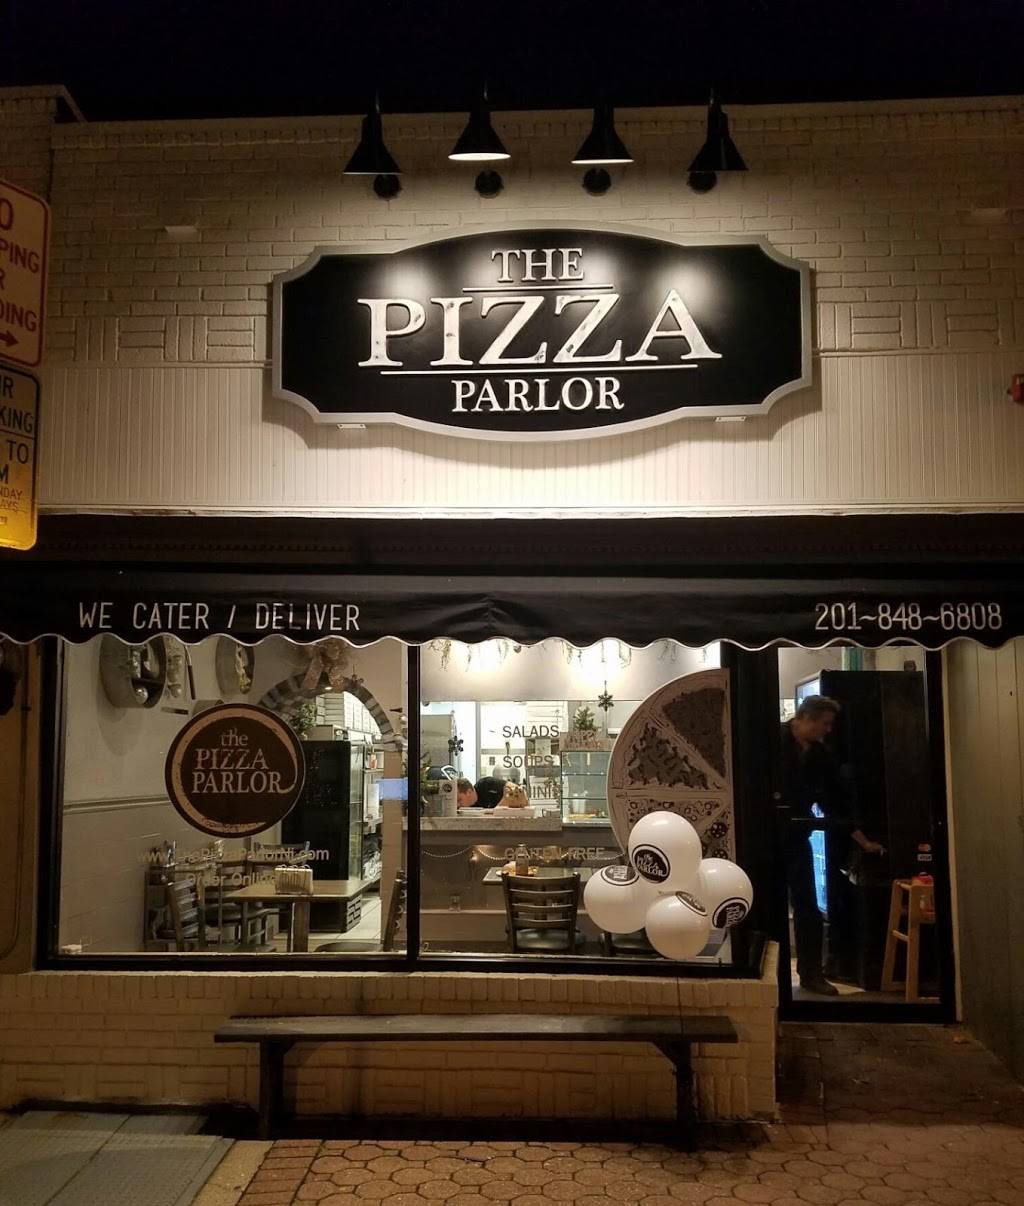 The Pizza Parlor | meal delivery | 394 Franklin Ave, Wyckoff, NJ 07481, USA | 2018486808 OR +1 201-848-6808